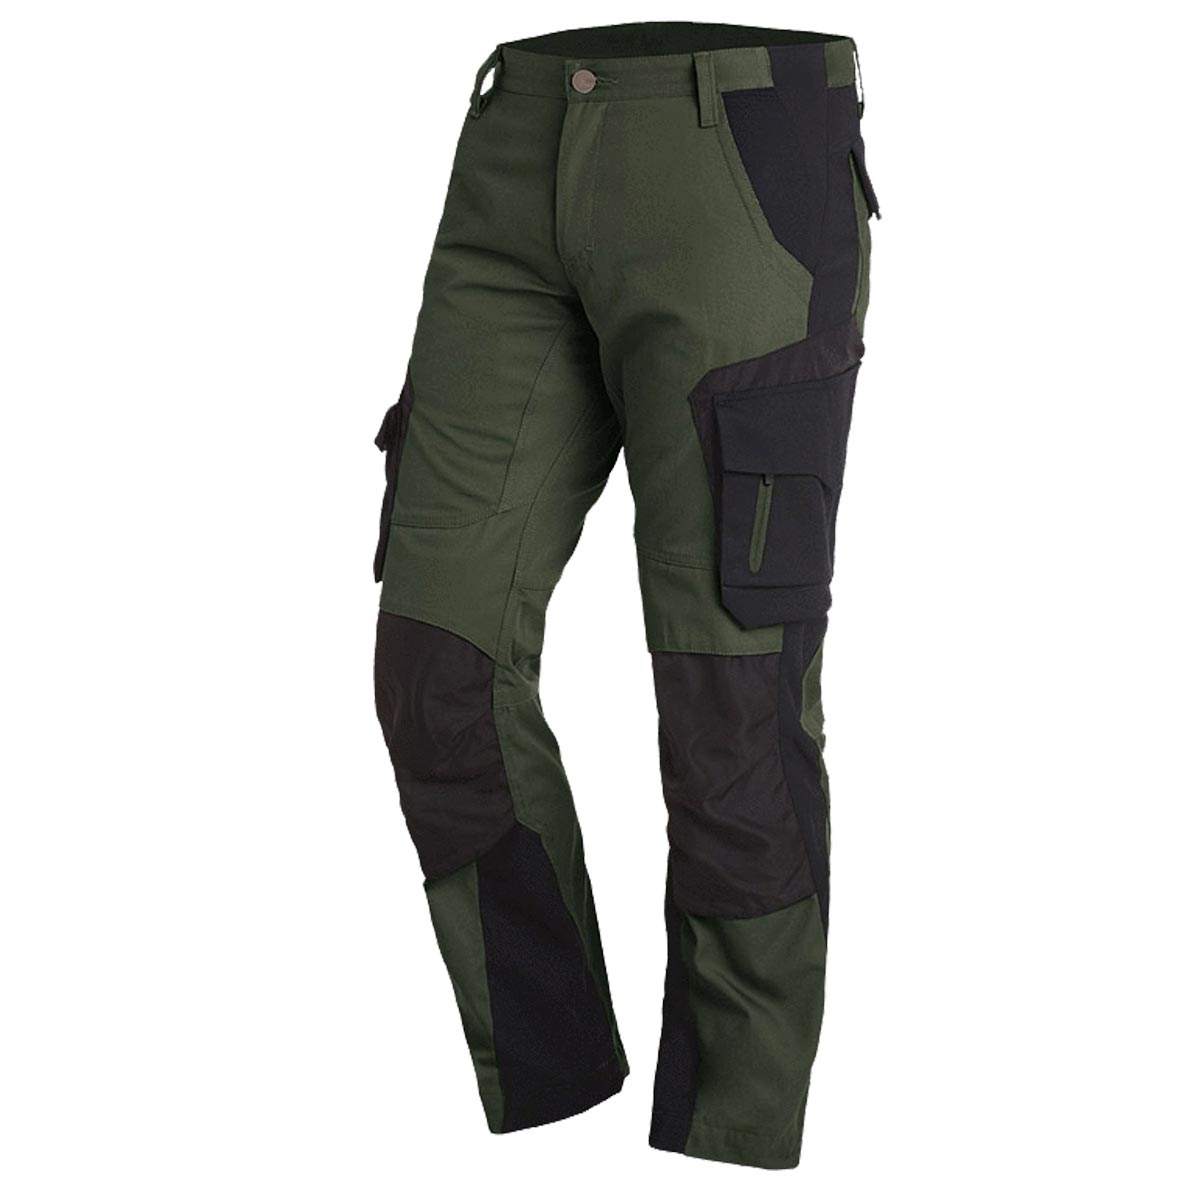 FHB work trousers with Cordura